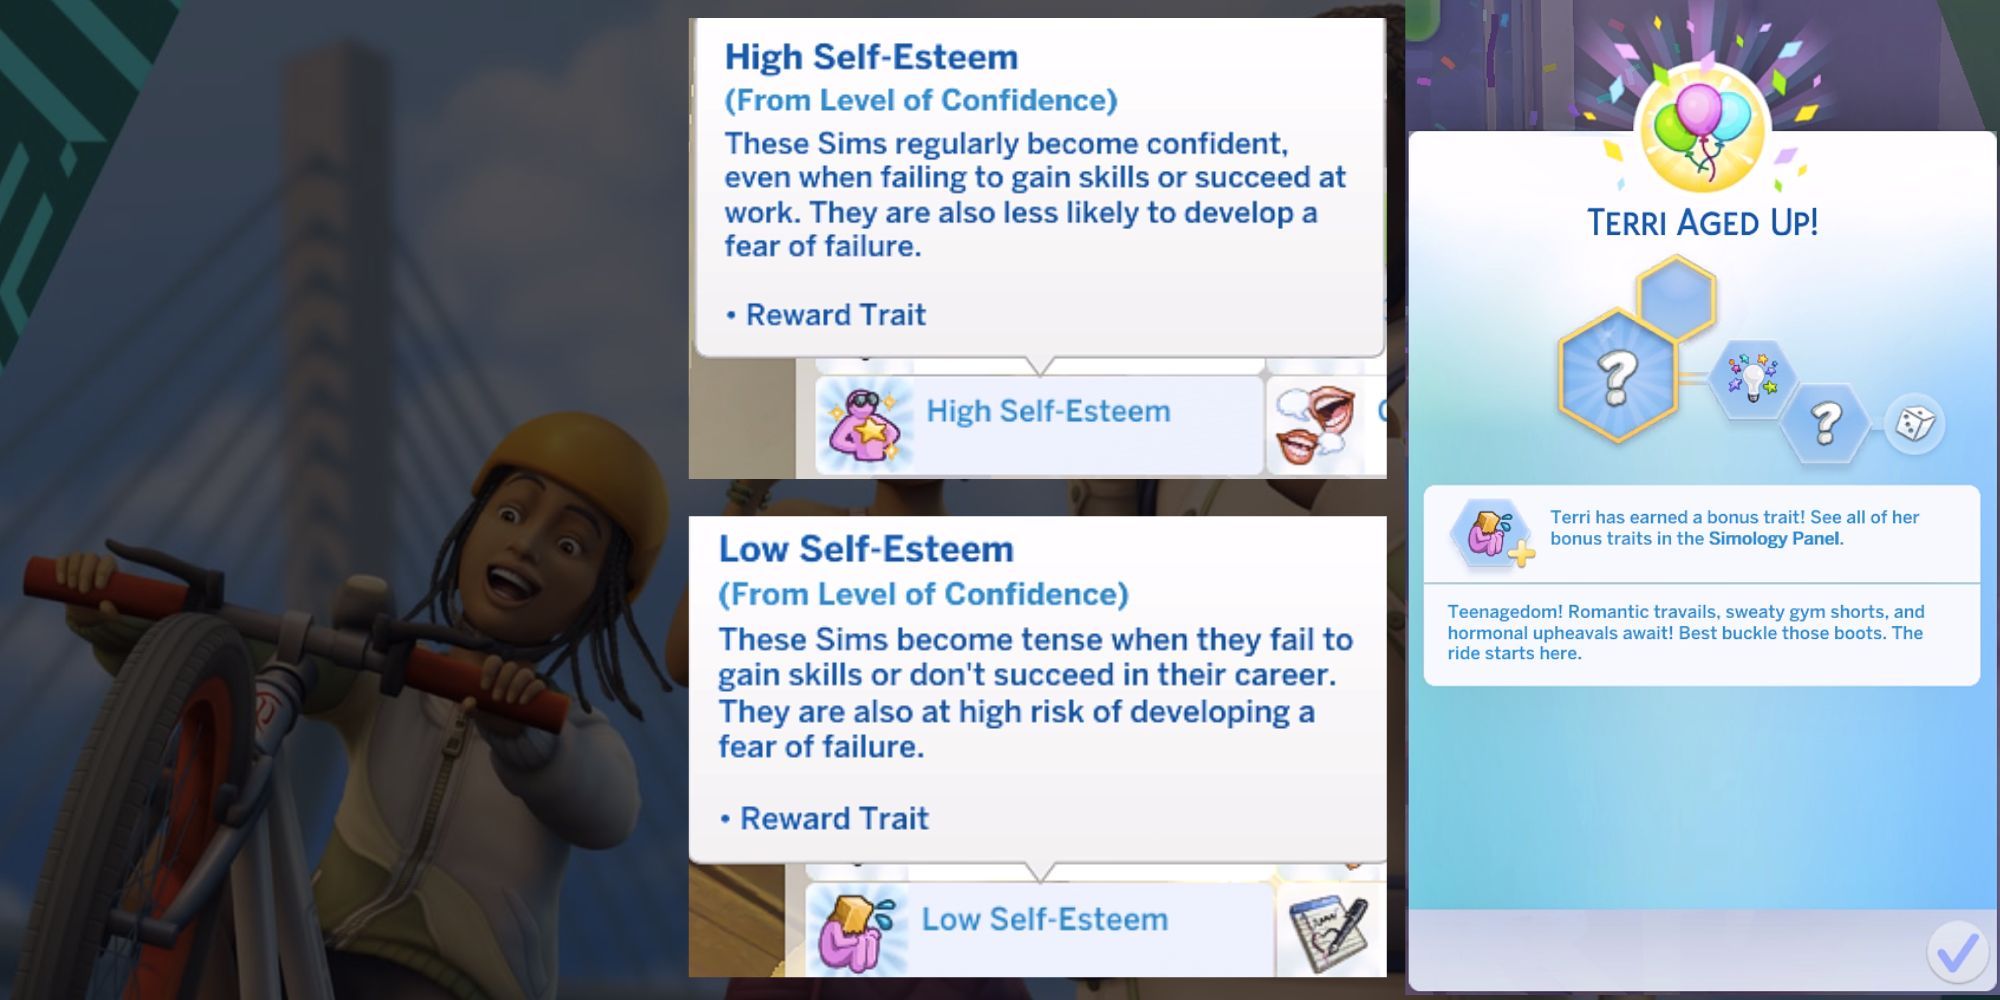 The Sims 4 Merging Confidence Reward Traits